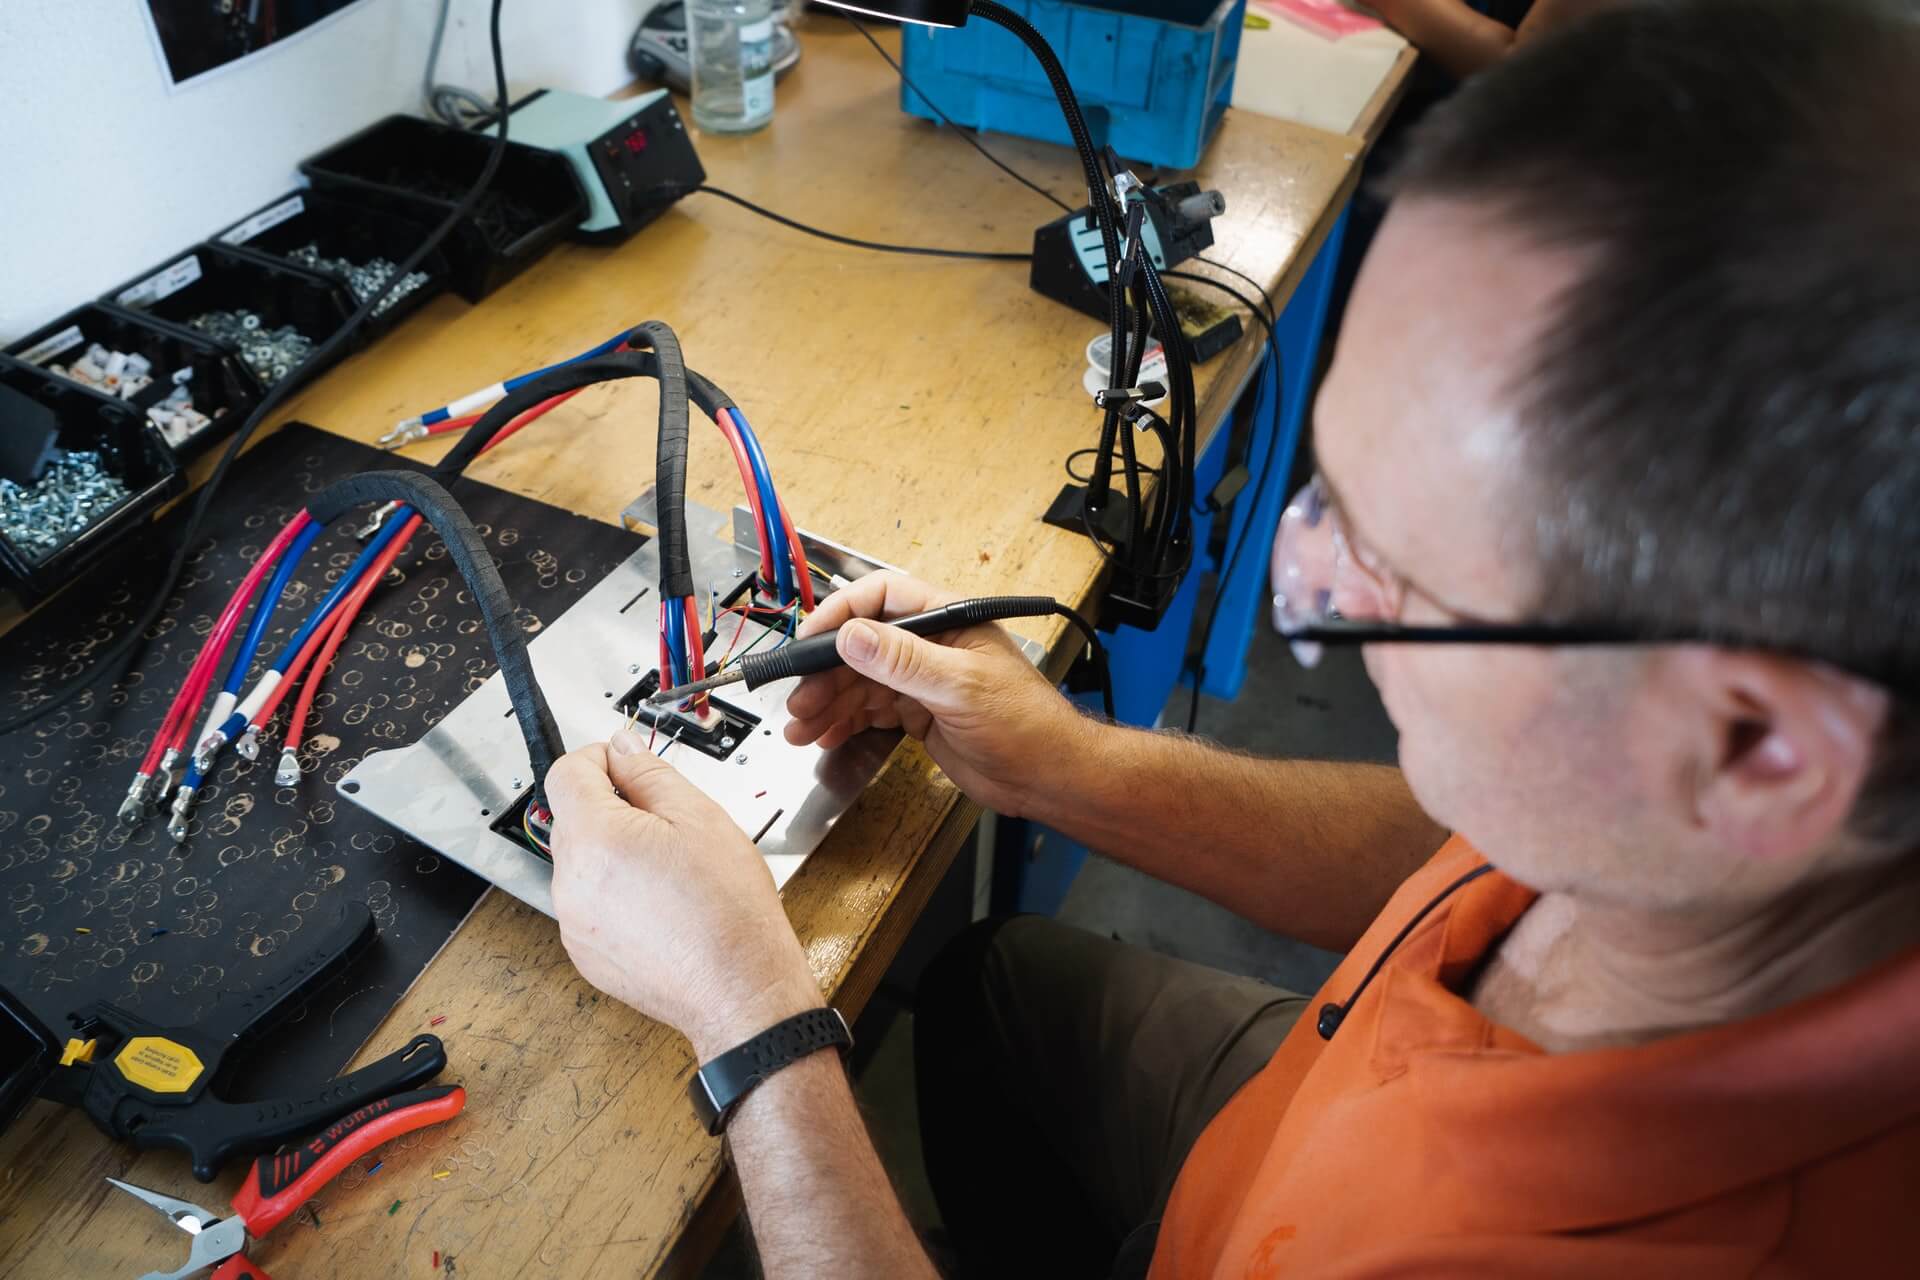 What is soldering?